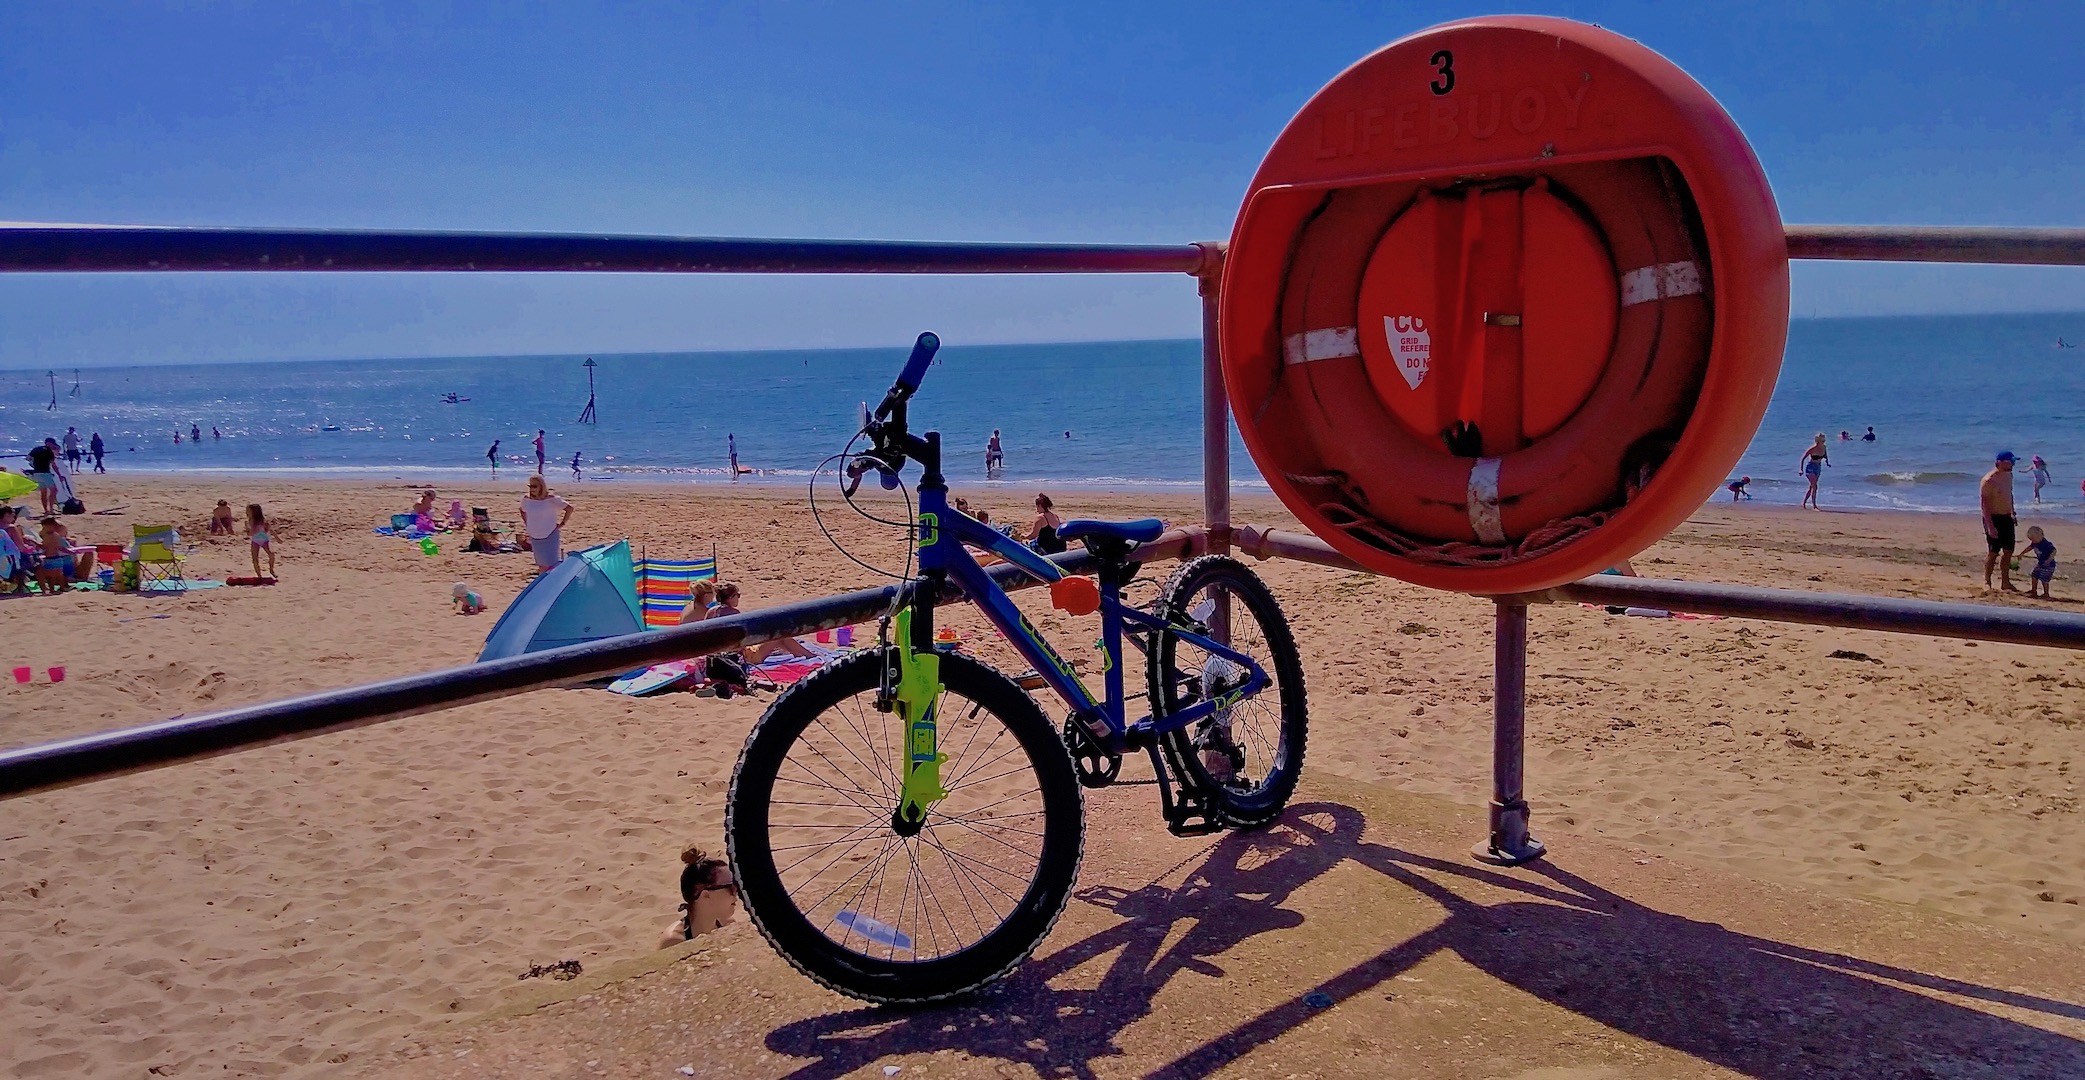 A view of a sandy beach and sea shore. In the foreground a bicycle is chained to a lifebuoy stand.